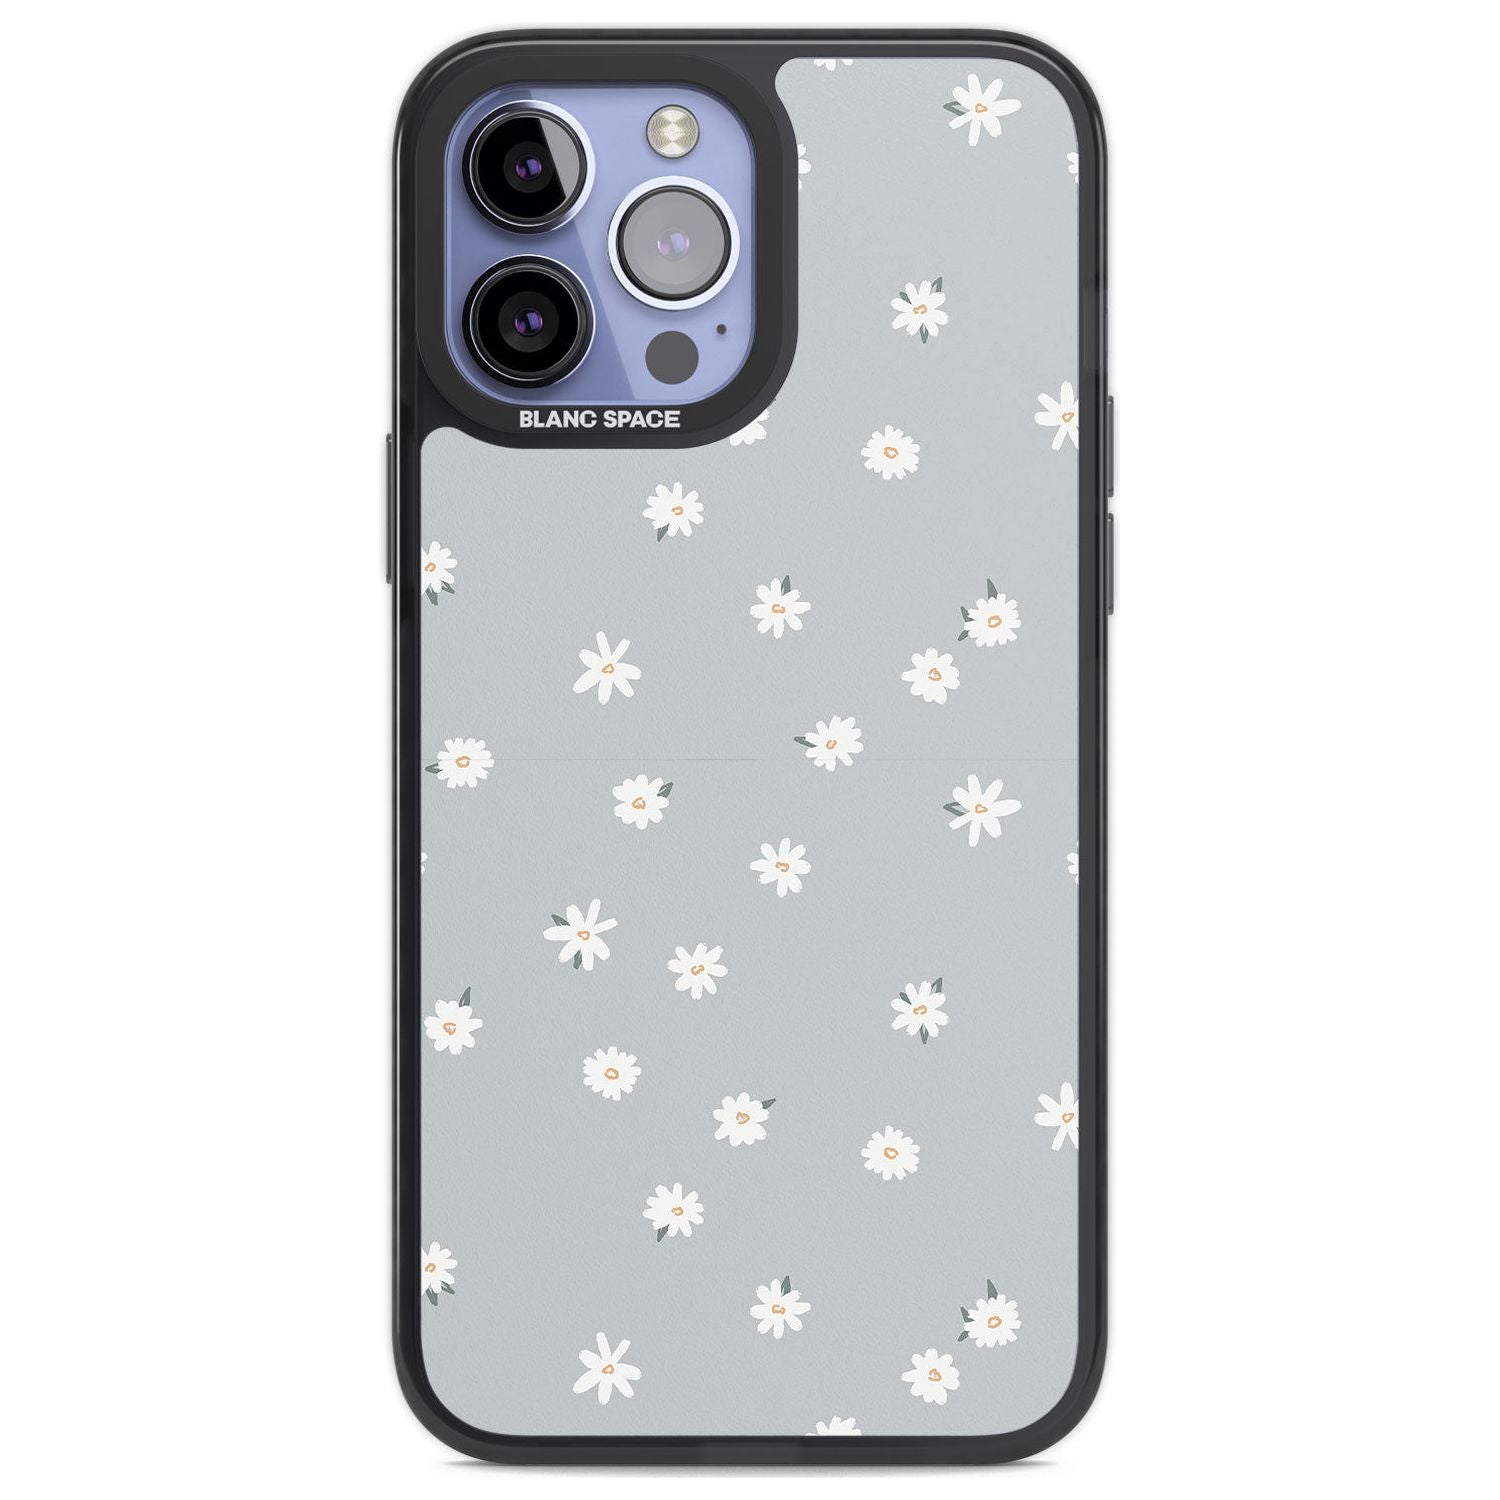 Painted Daisy Blue-Grey Cute Phone Case iPhone 13 Pro Max / Black Impact Case,iPhone 14 Pro Max / Black Impact Case Blanc Space